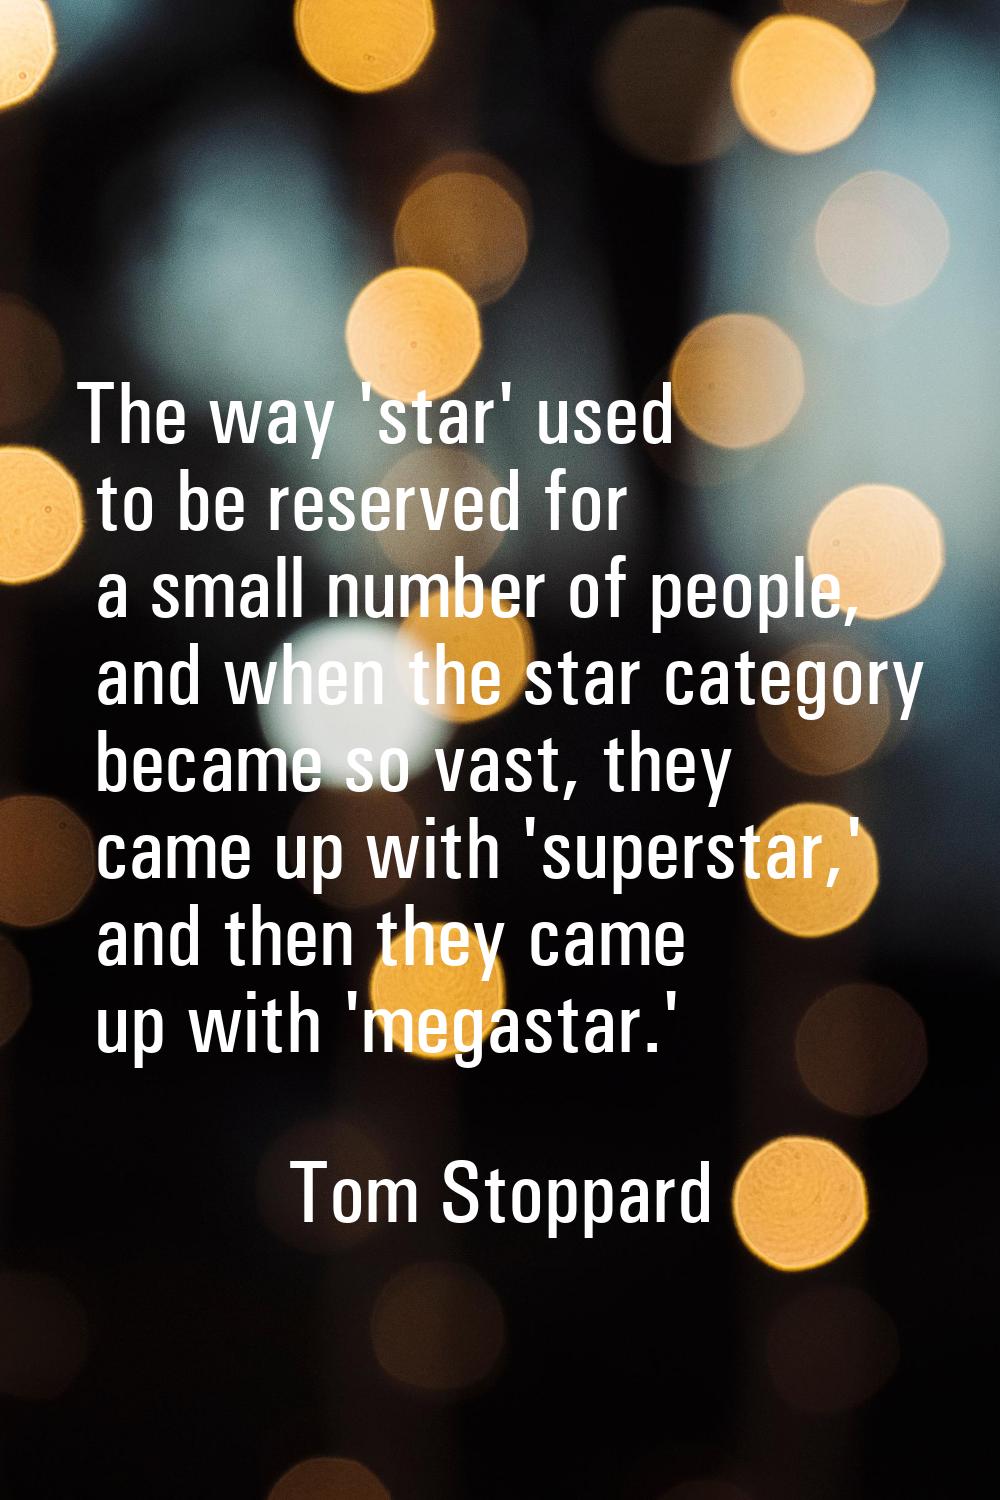 The way 'star' used to be reserved for a small number of people, and when the star category became 